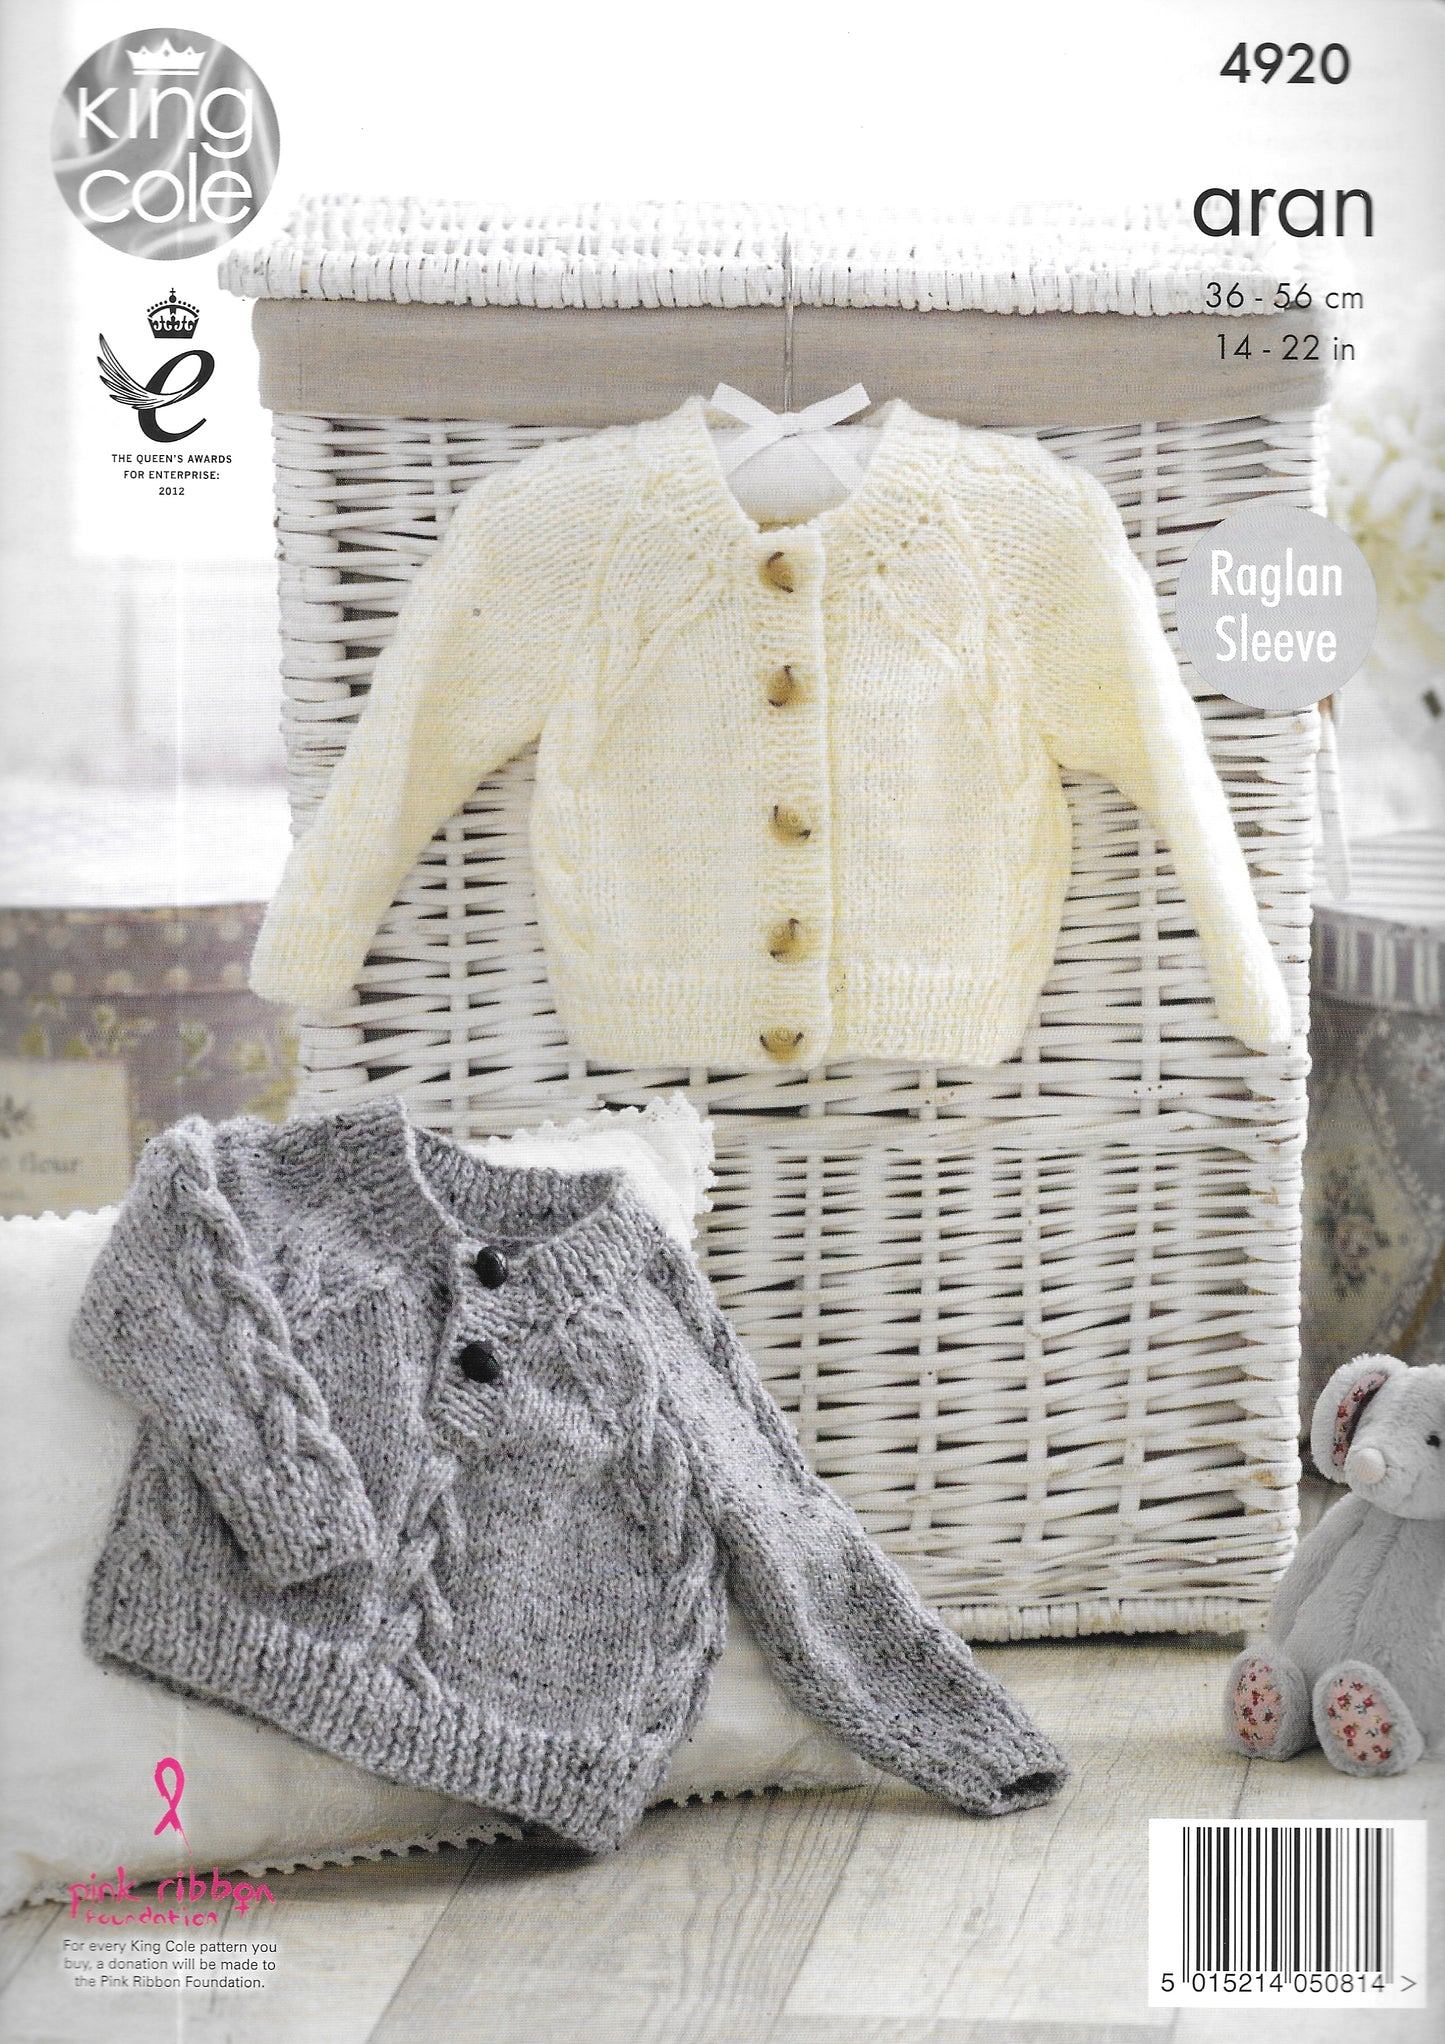 4920 King Cole knitting pattern. Child's cable cardigan. Aran